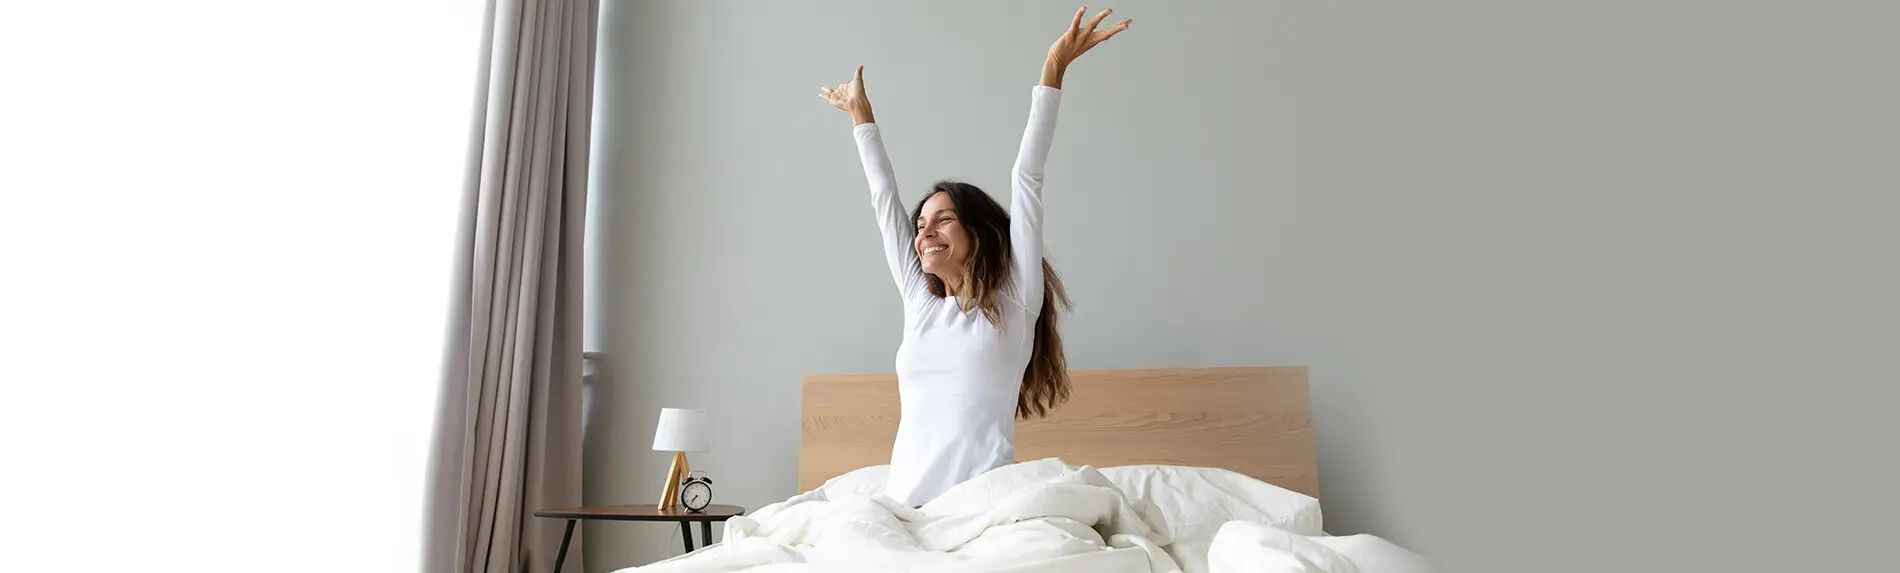 7 Reasons Why You Should Fall in Love with Mattress Care